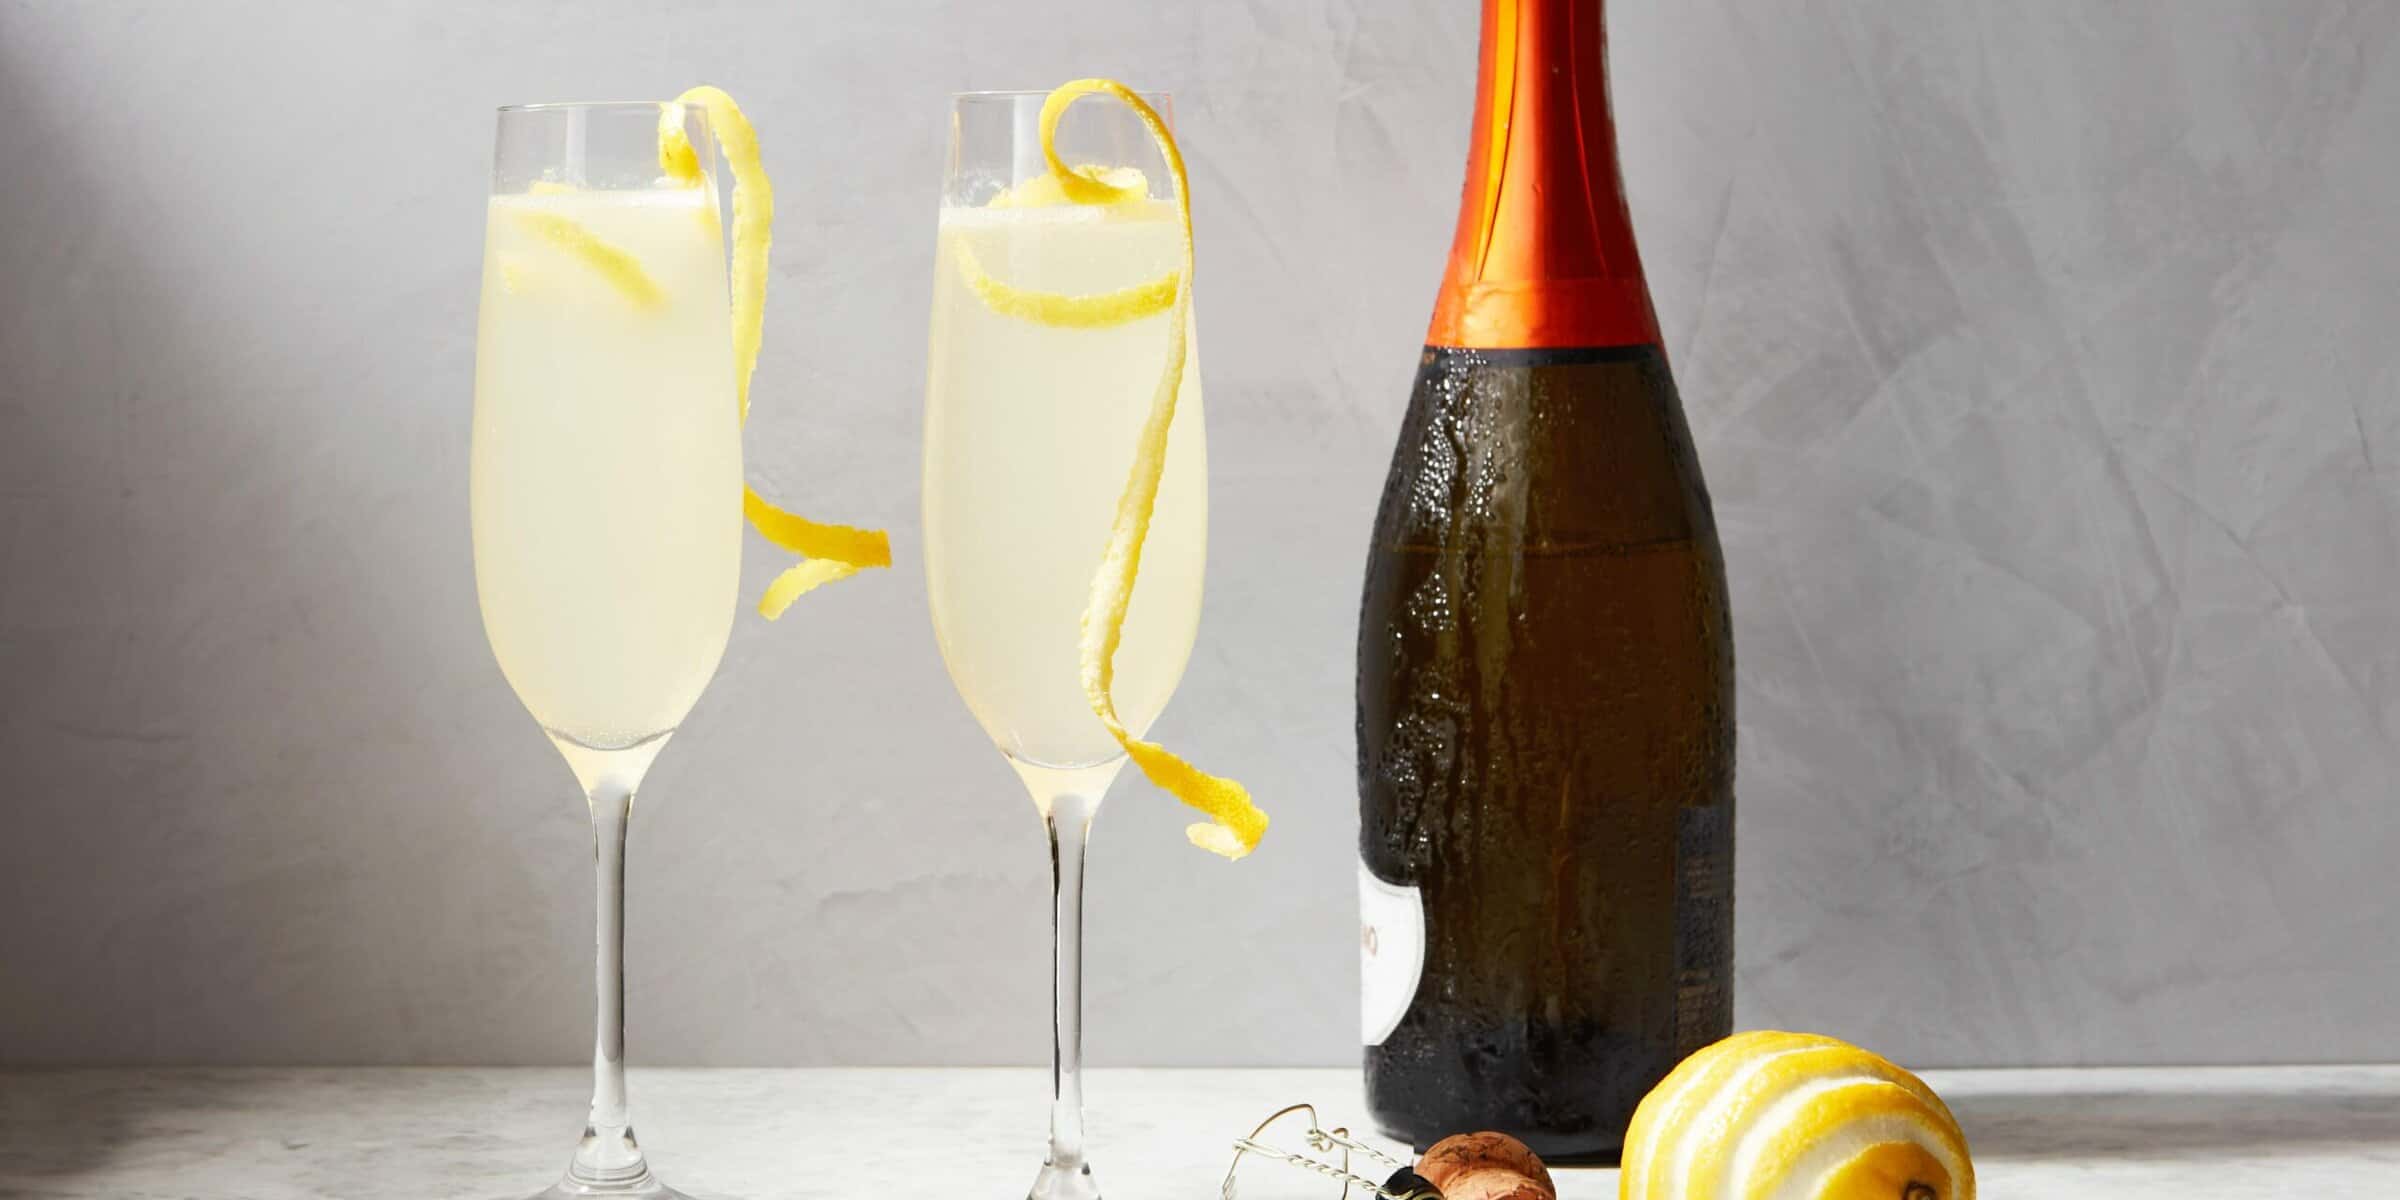  The combination of gin, lemon juice, and champagne creates a balanced and delicious flavor